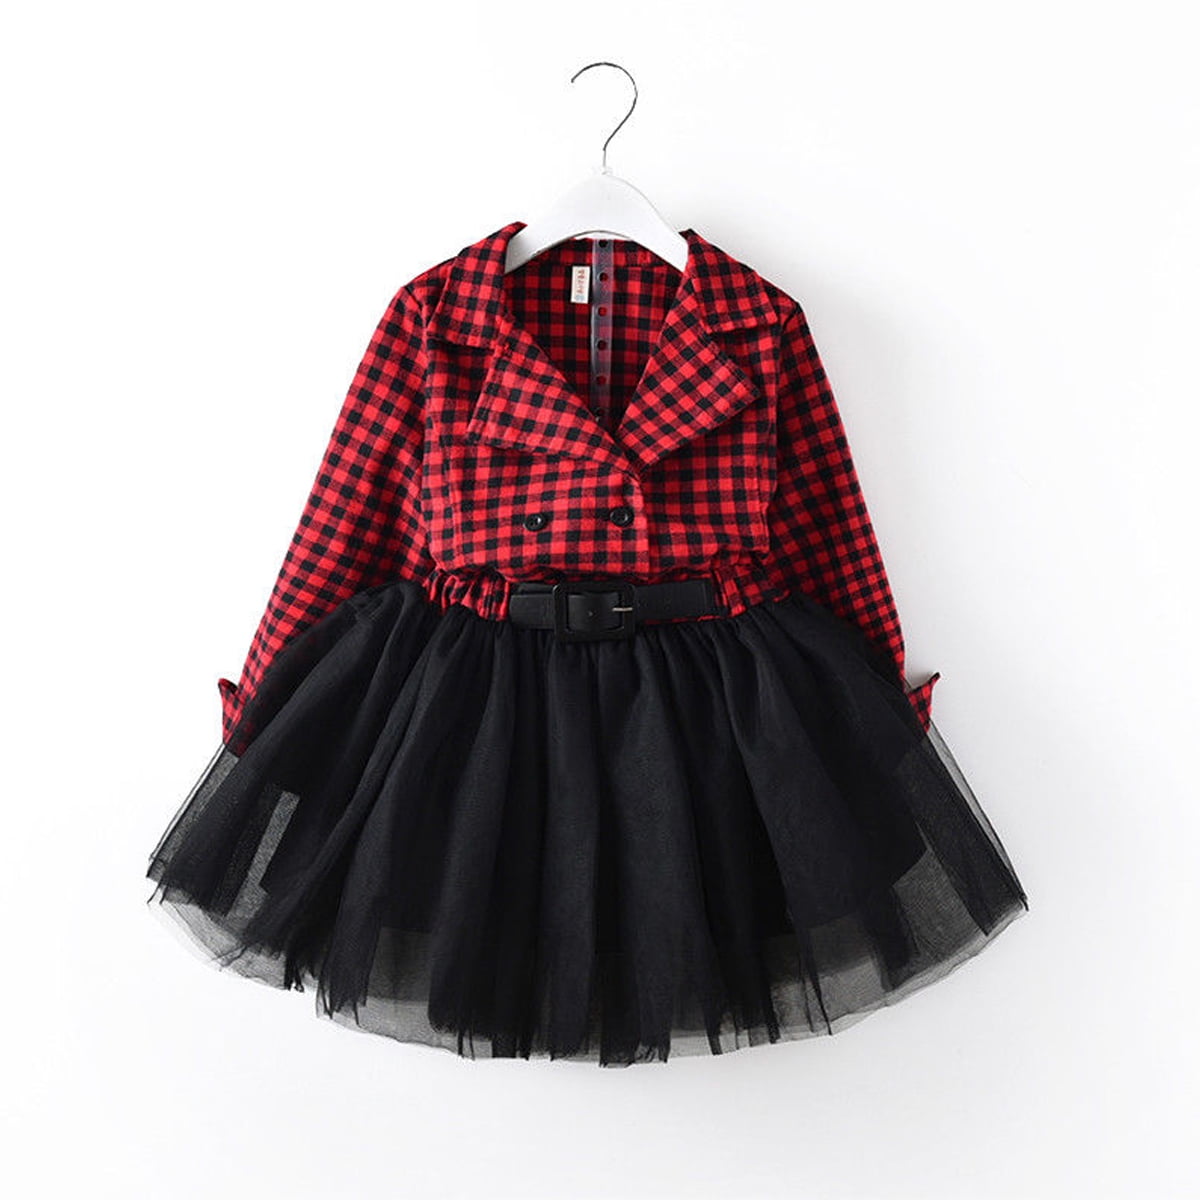 Baby Toddler Girl Christmas Red Plaid Tartan Princess Dress Party Costume Outfit 